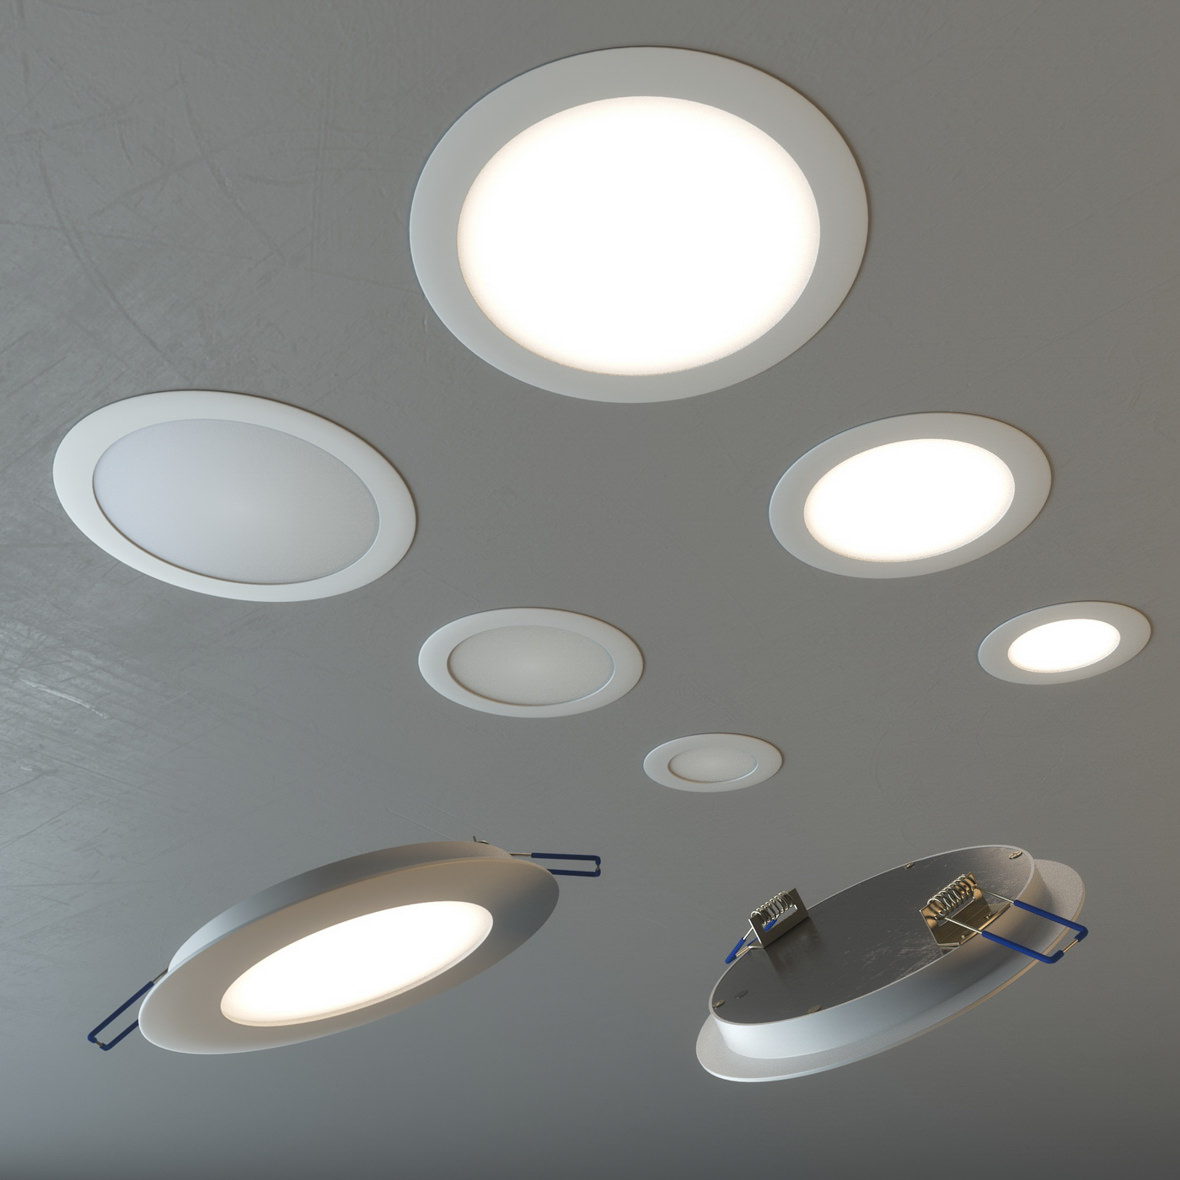 Photorealistic 3D rendering of round lamps fitted in the ceiling 